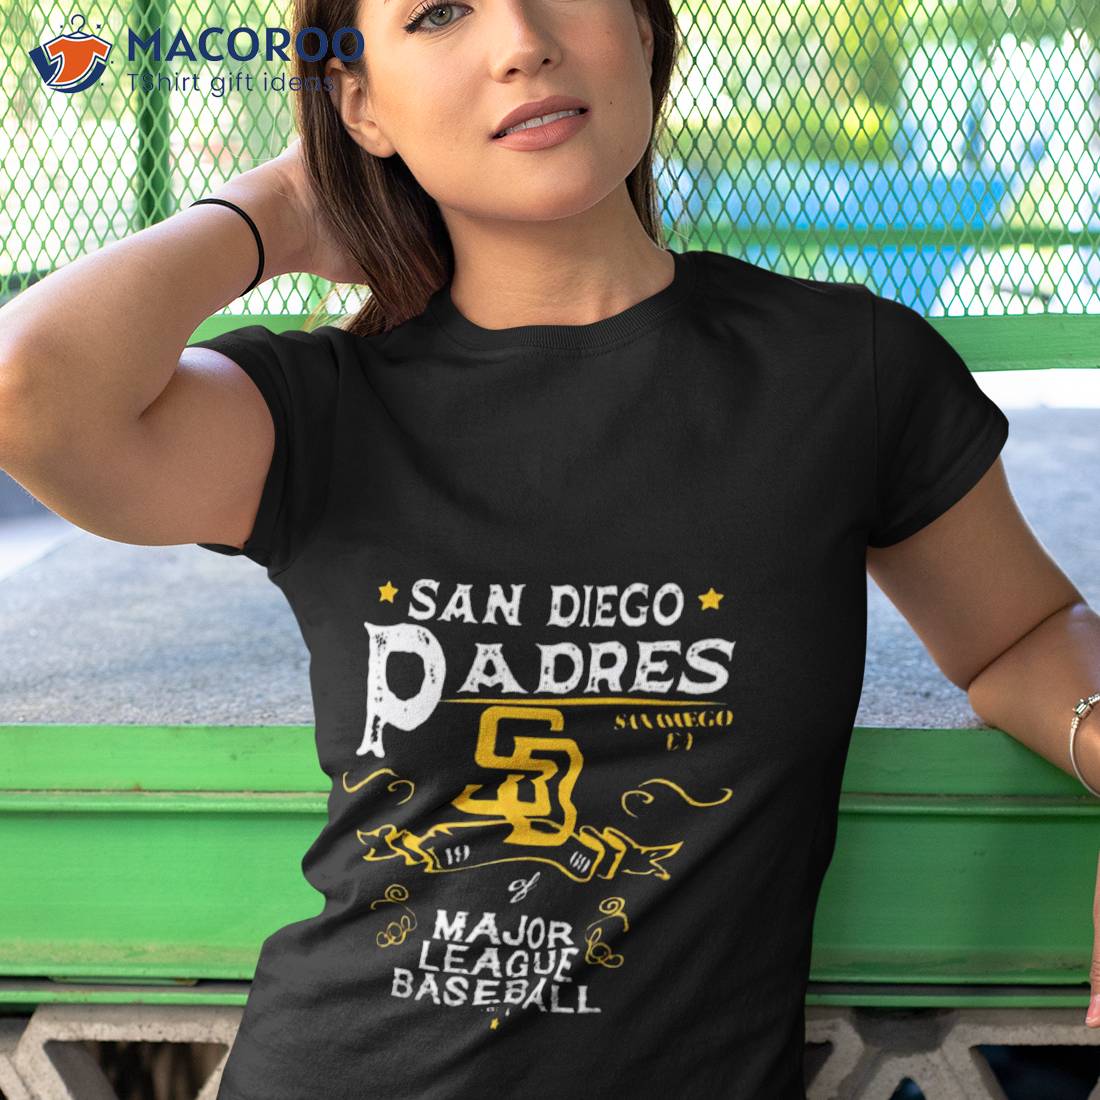 San Diego Padres T-Shirts for Sale